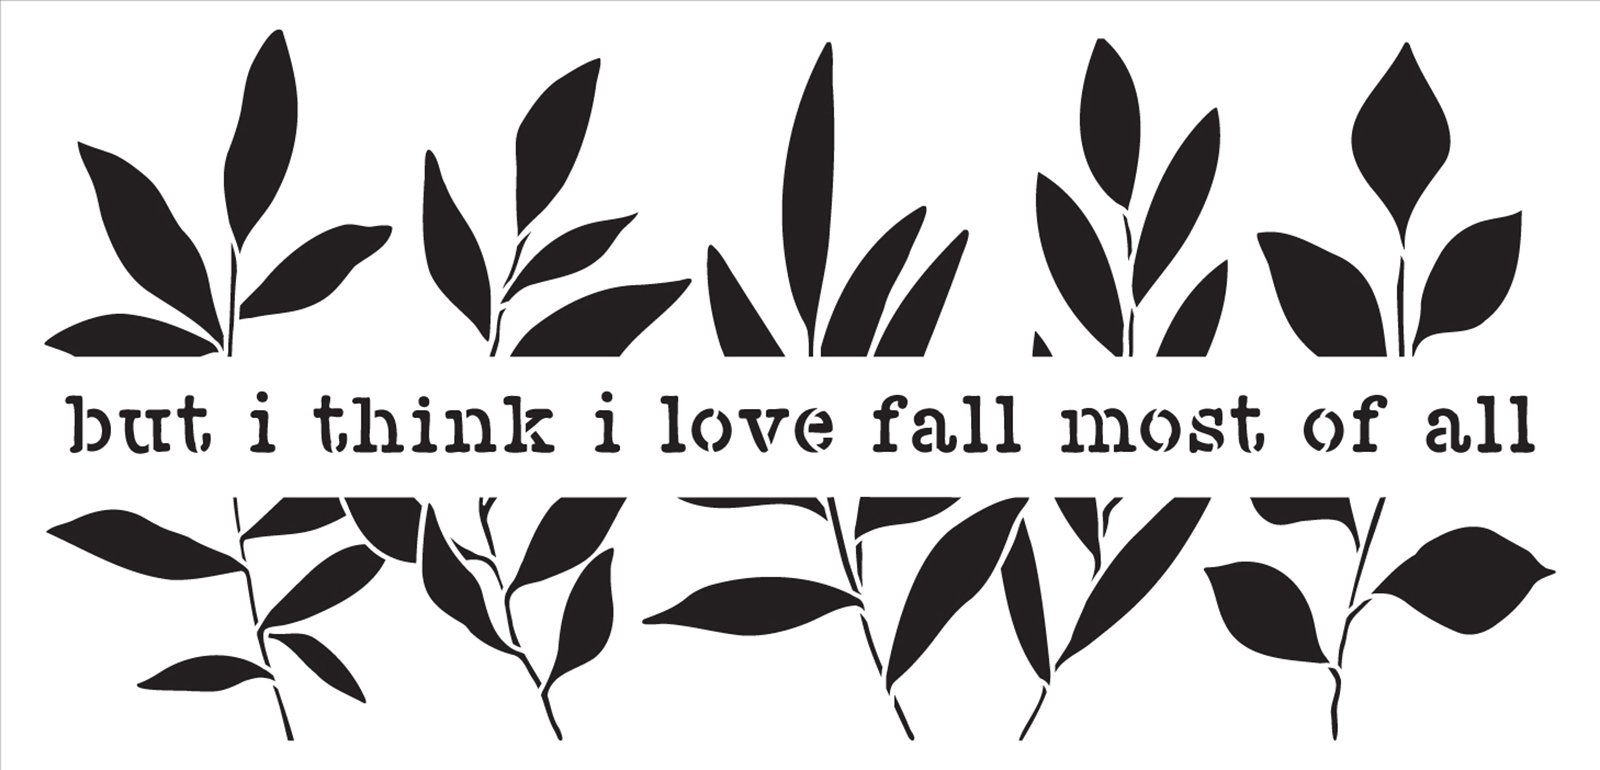 Love Fall Most of All Stencil with Leaves by StudioR12 - Select Size - USA Made - DIY Autumn Home Decor - Craft & Paint Seasonal Wood Signs - STCL7079